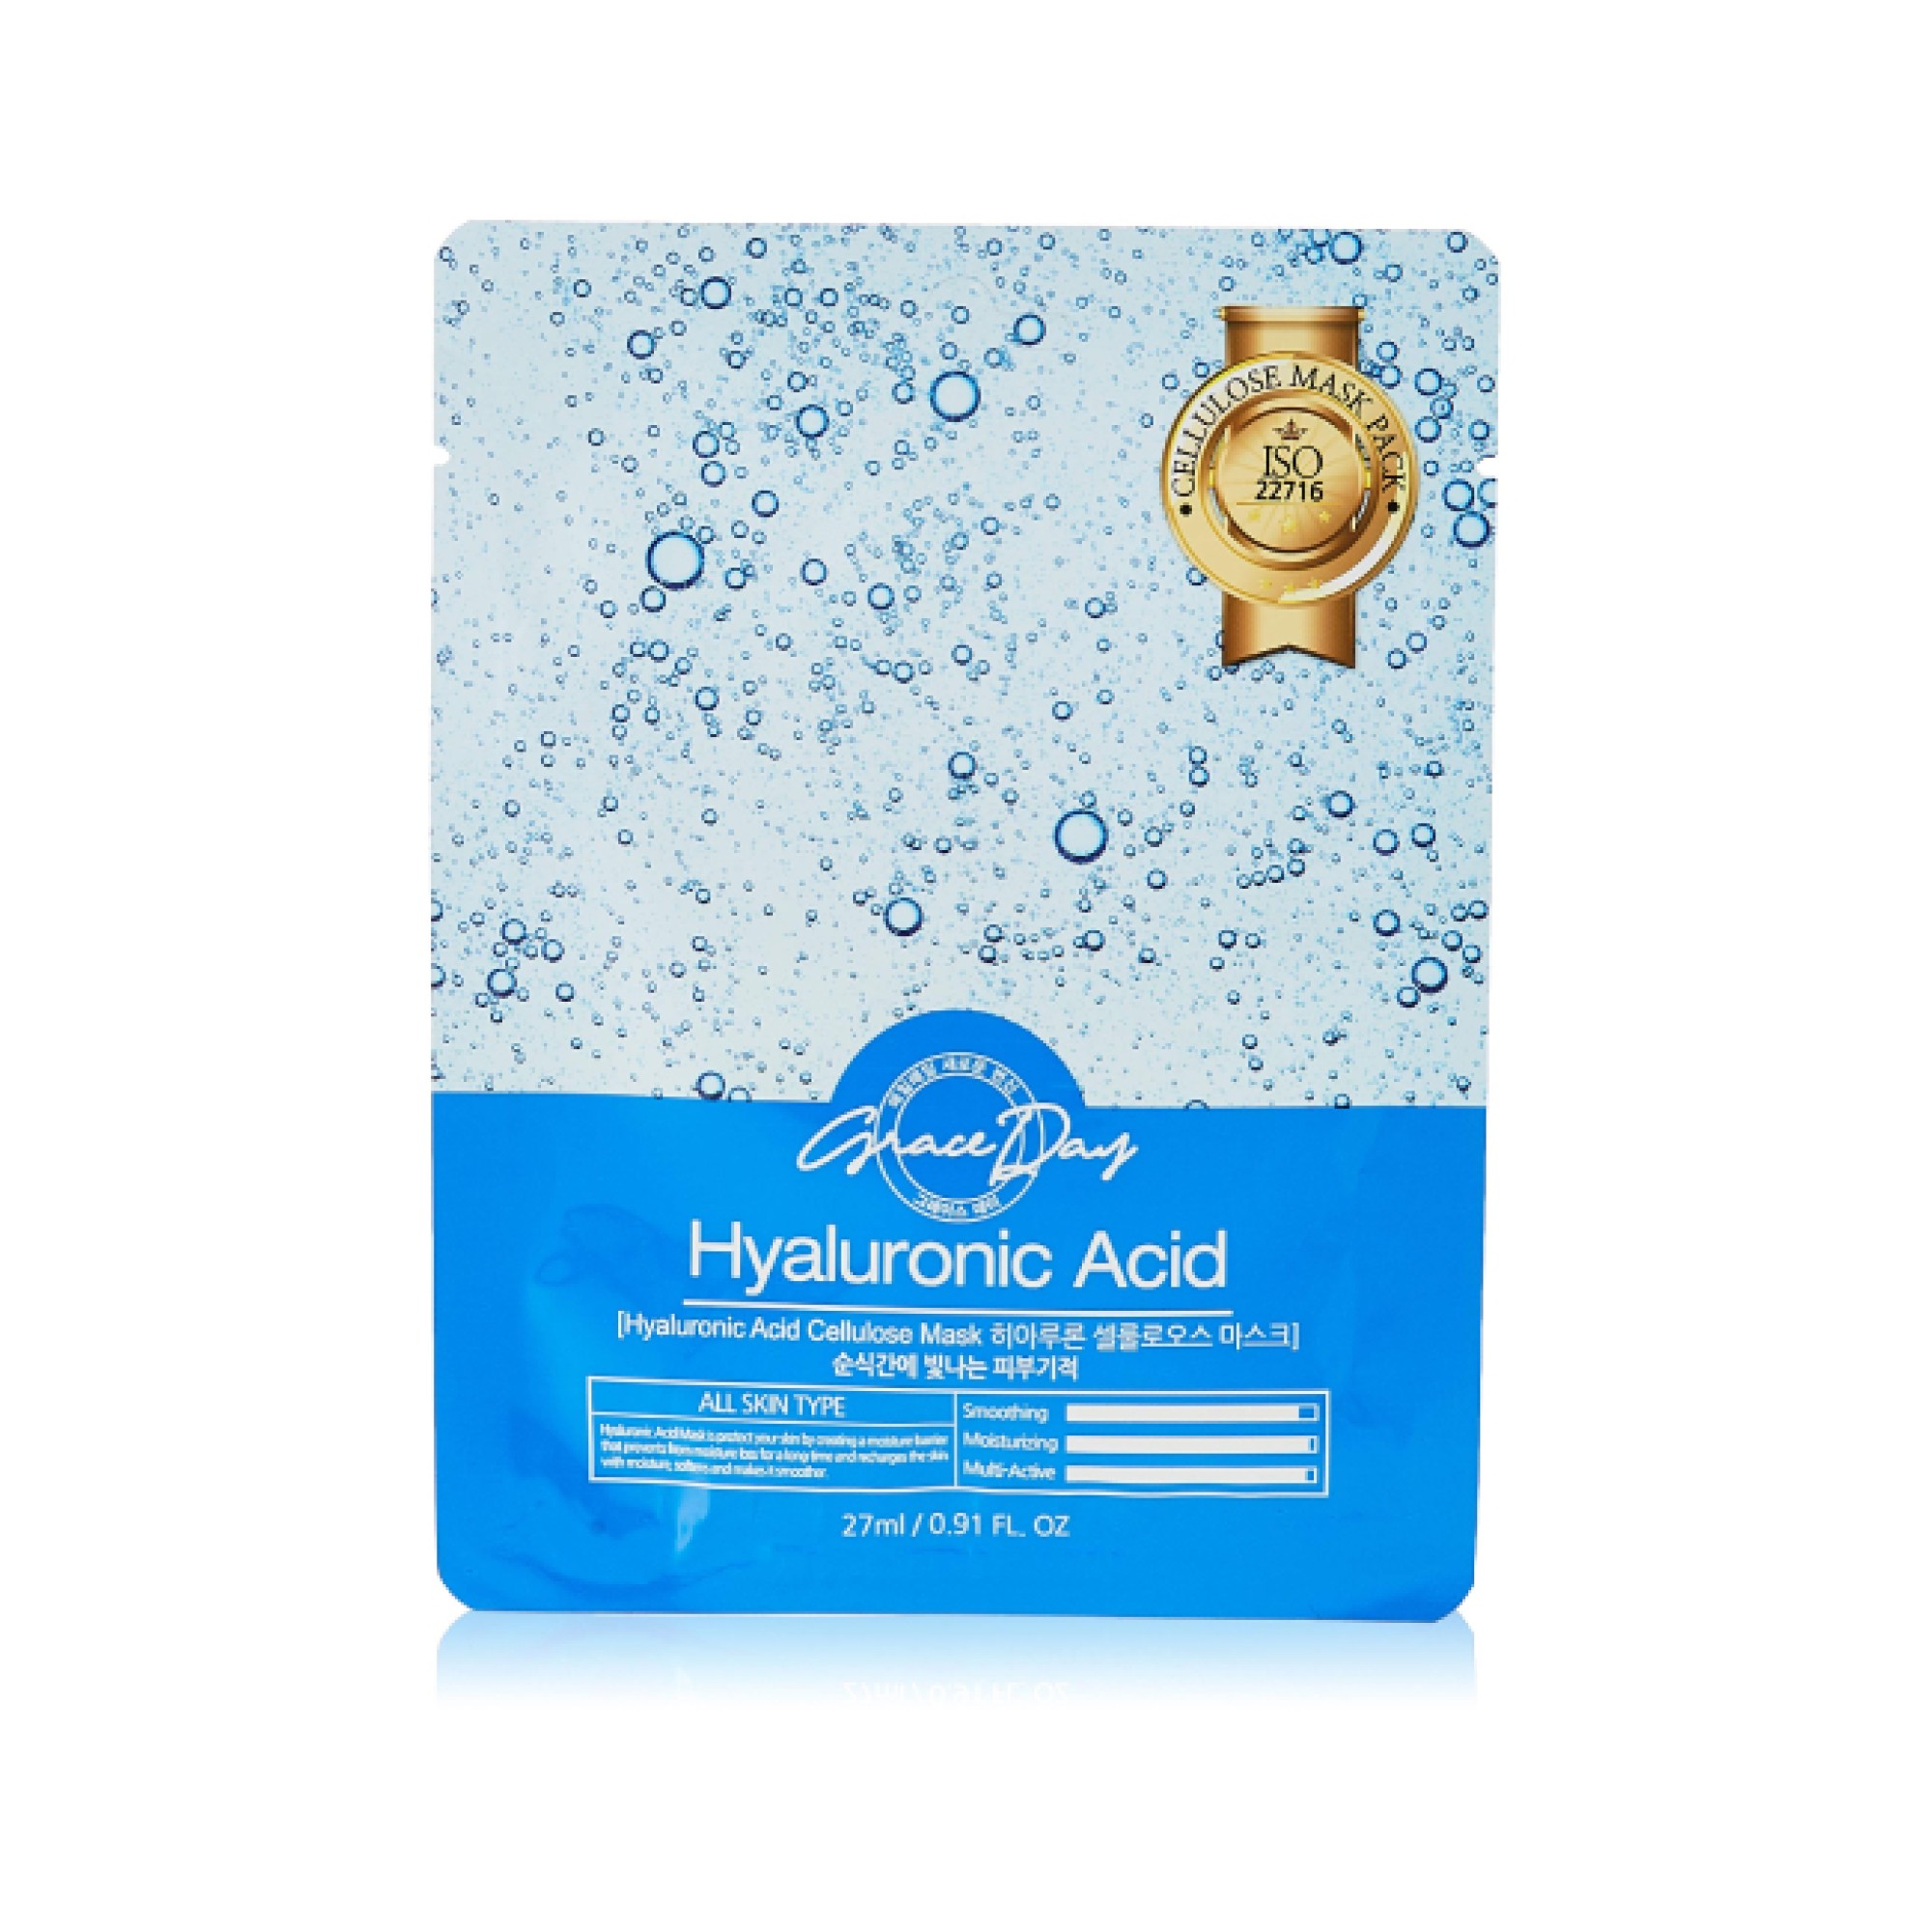  Grace Day Hyaluronic Acid Cellulose Mask 27ml